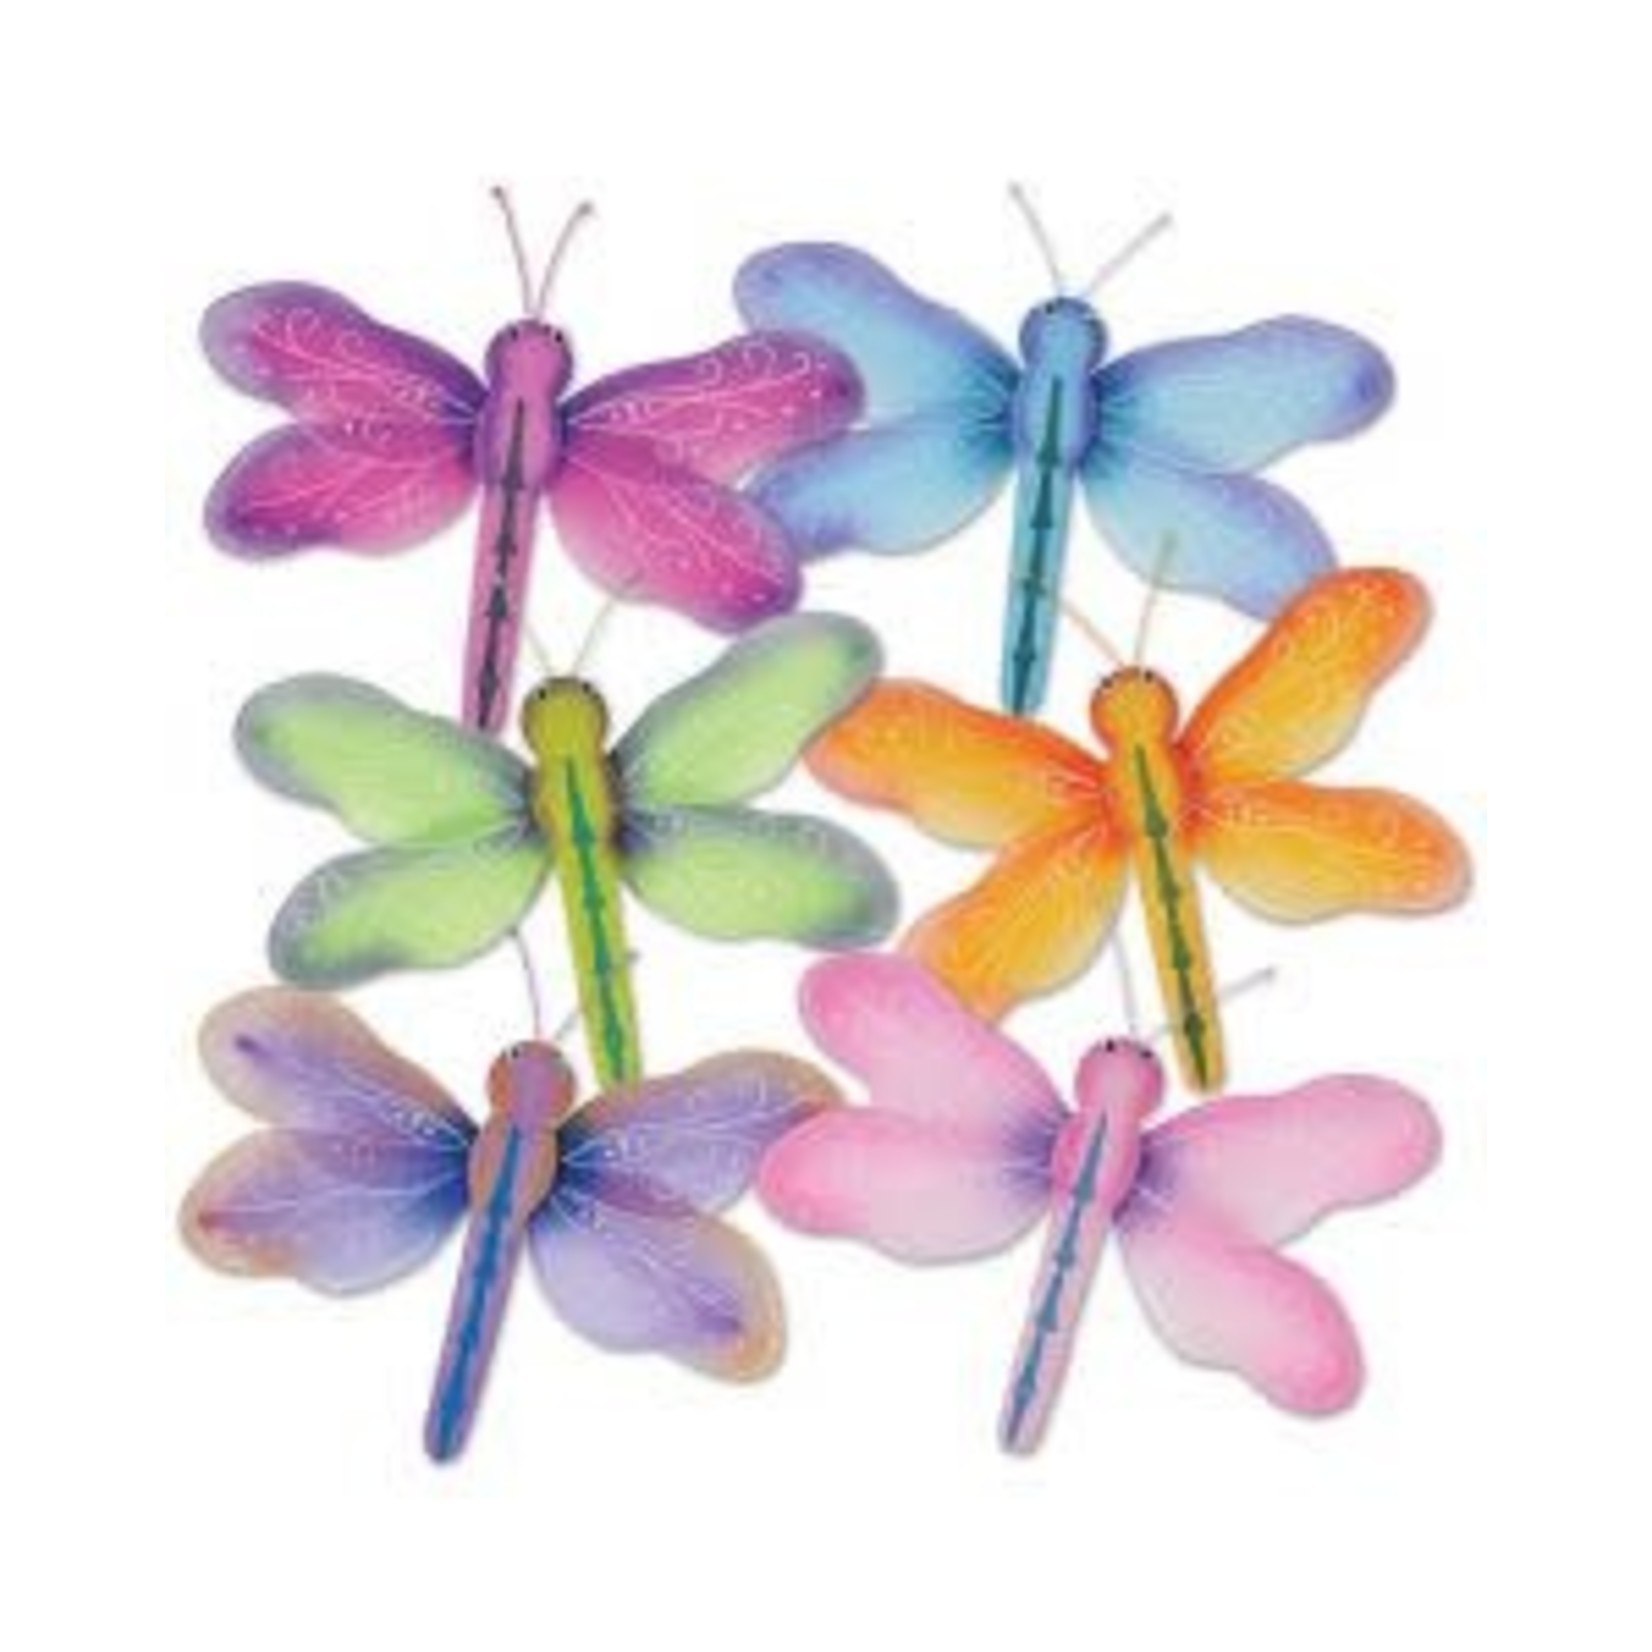 Beistle Colorful Nylon Dragonflies - 1ct. (Assorted Styles & Colors)